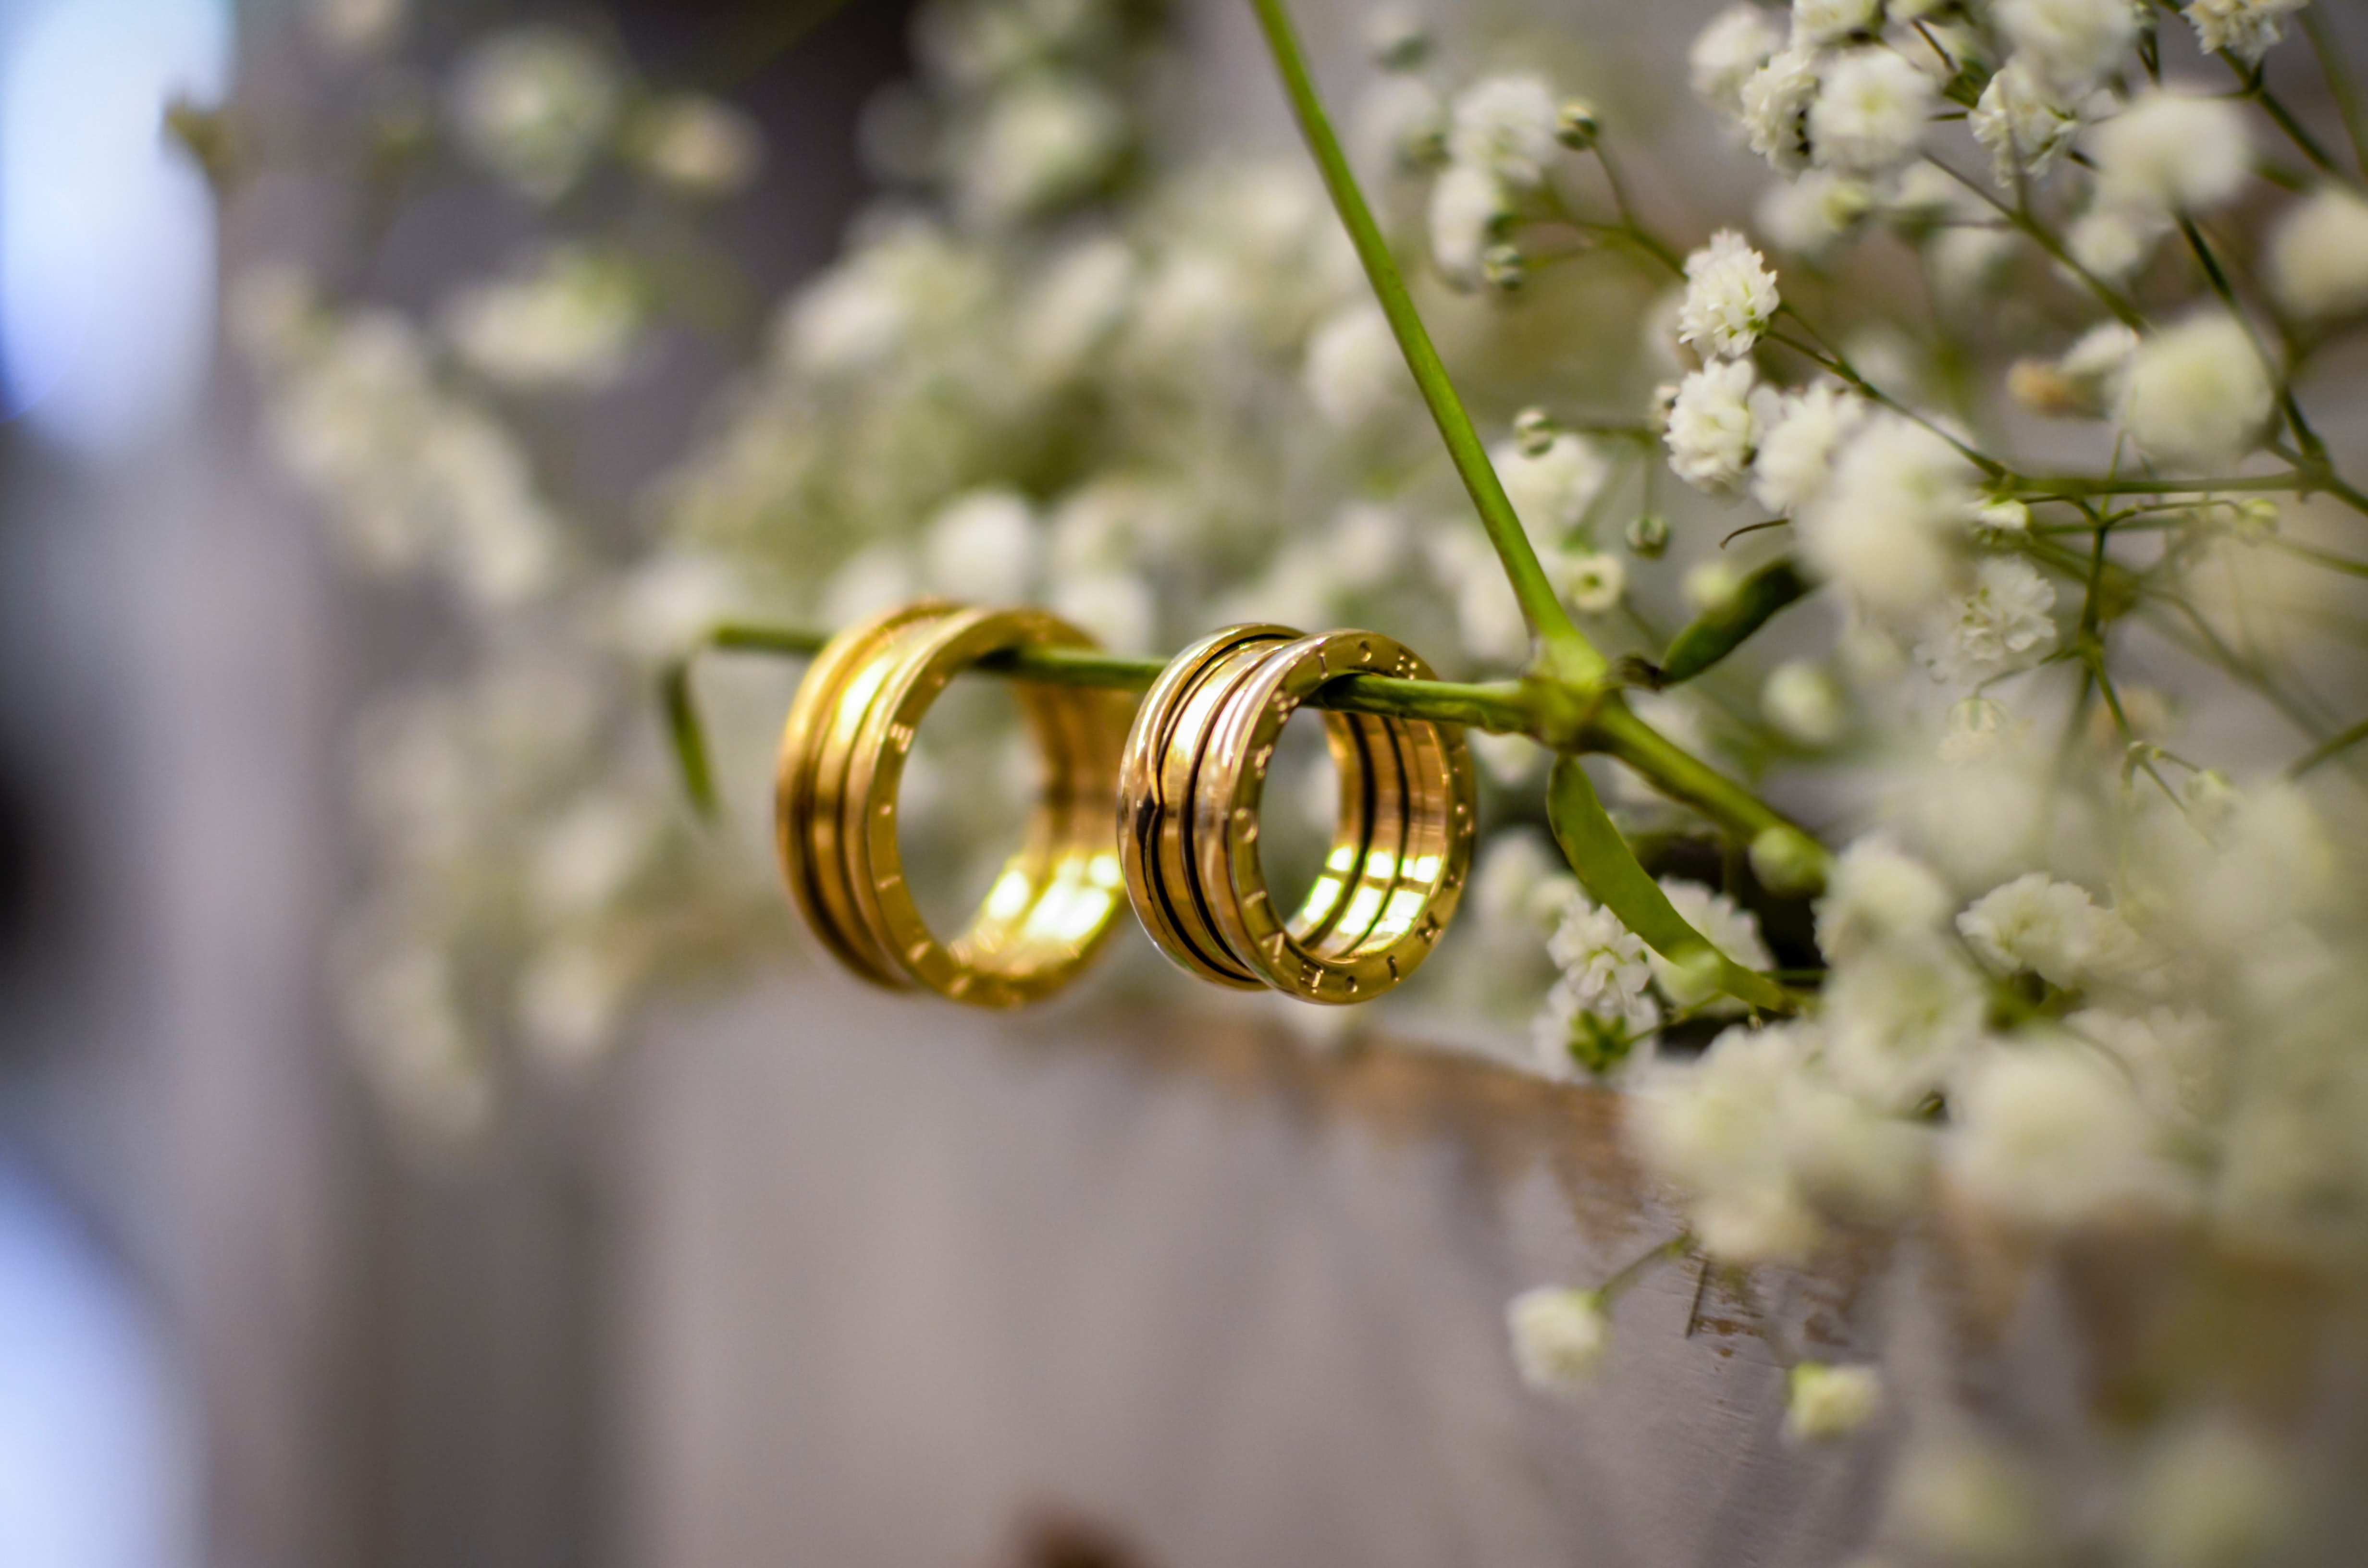 Tips From a Professional: Capturing the Beauty of Wedding Jewelry With a Lens